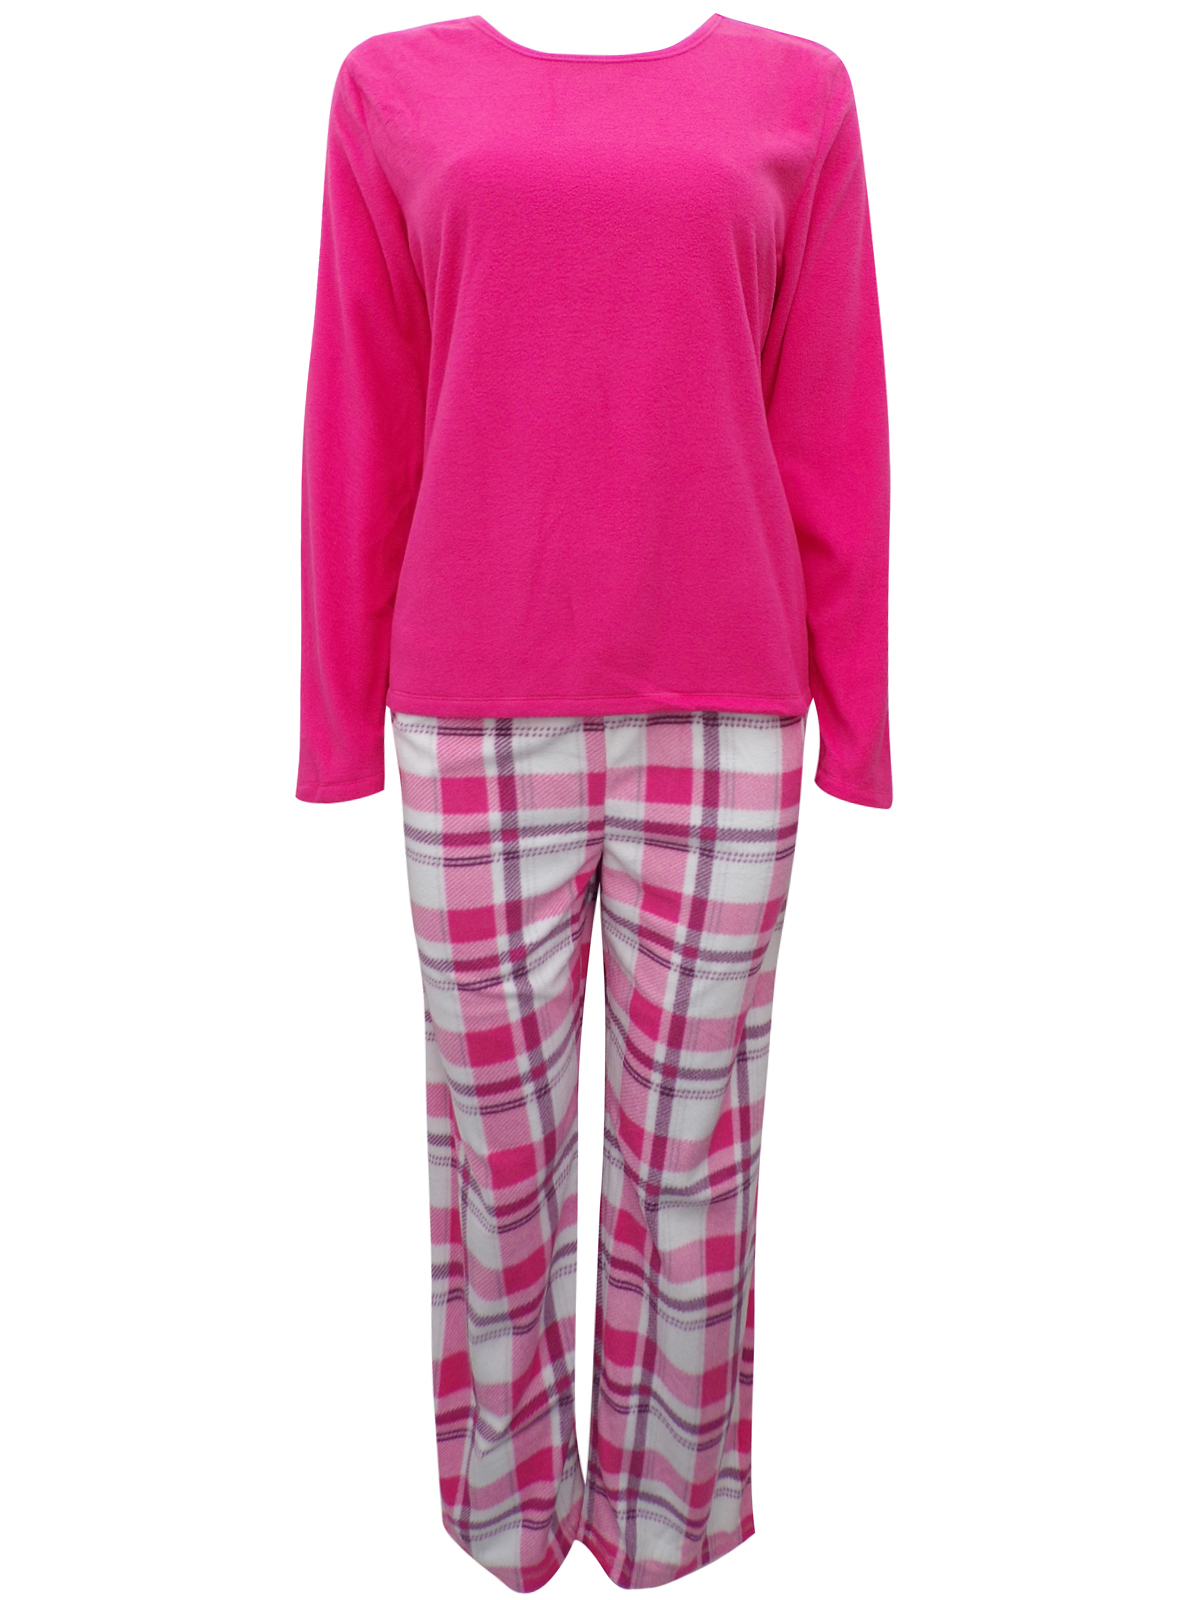 Marks and Spencer - - M&5 PINK Checked Print Fleece Pyjamas - Size 10 to 22